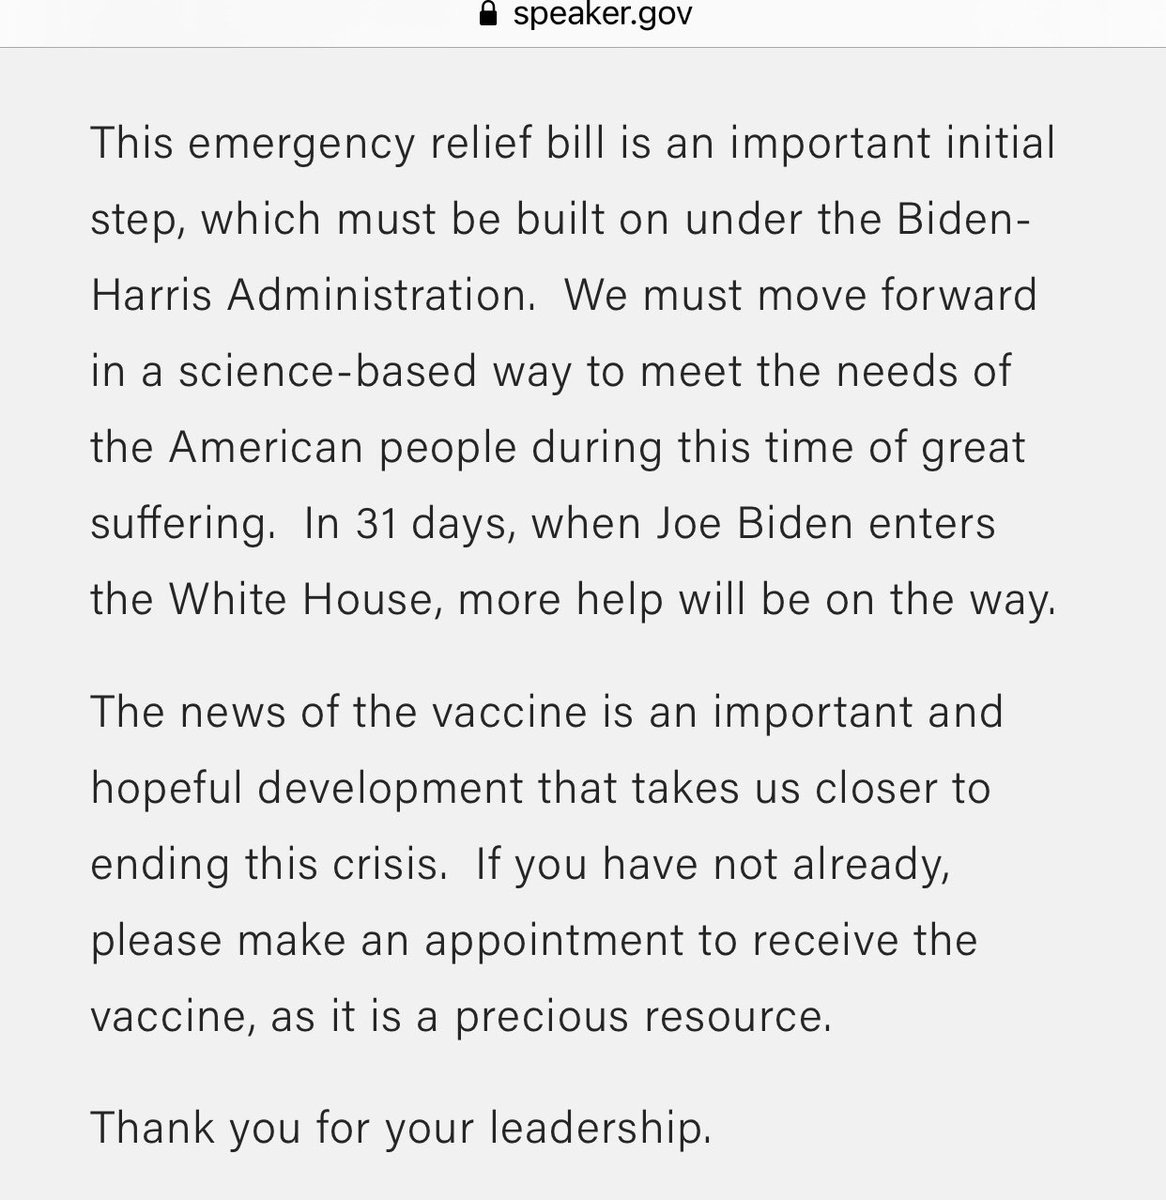 Speaker Pelosi’s Announcement (final) 5/5:“This emergency relief bill is an important initial step, which must be built on under the  @JoeBiden/ @KamalaHarris Administration. We must move forward in a science-based way to meet the needs of the American people during this time...”